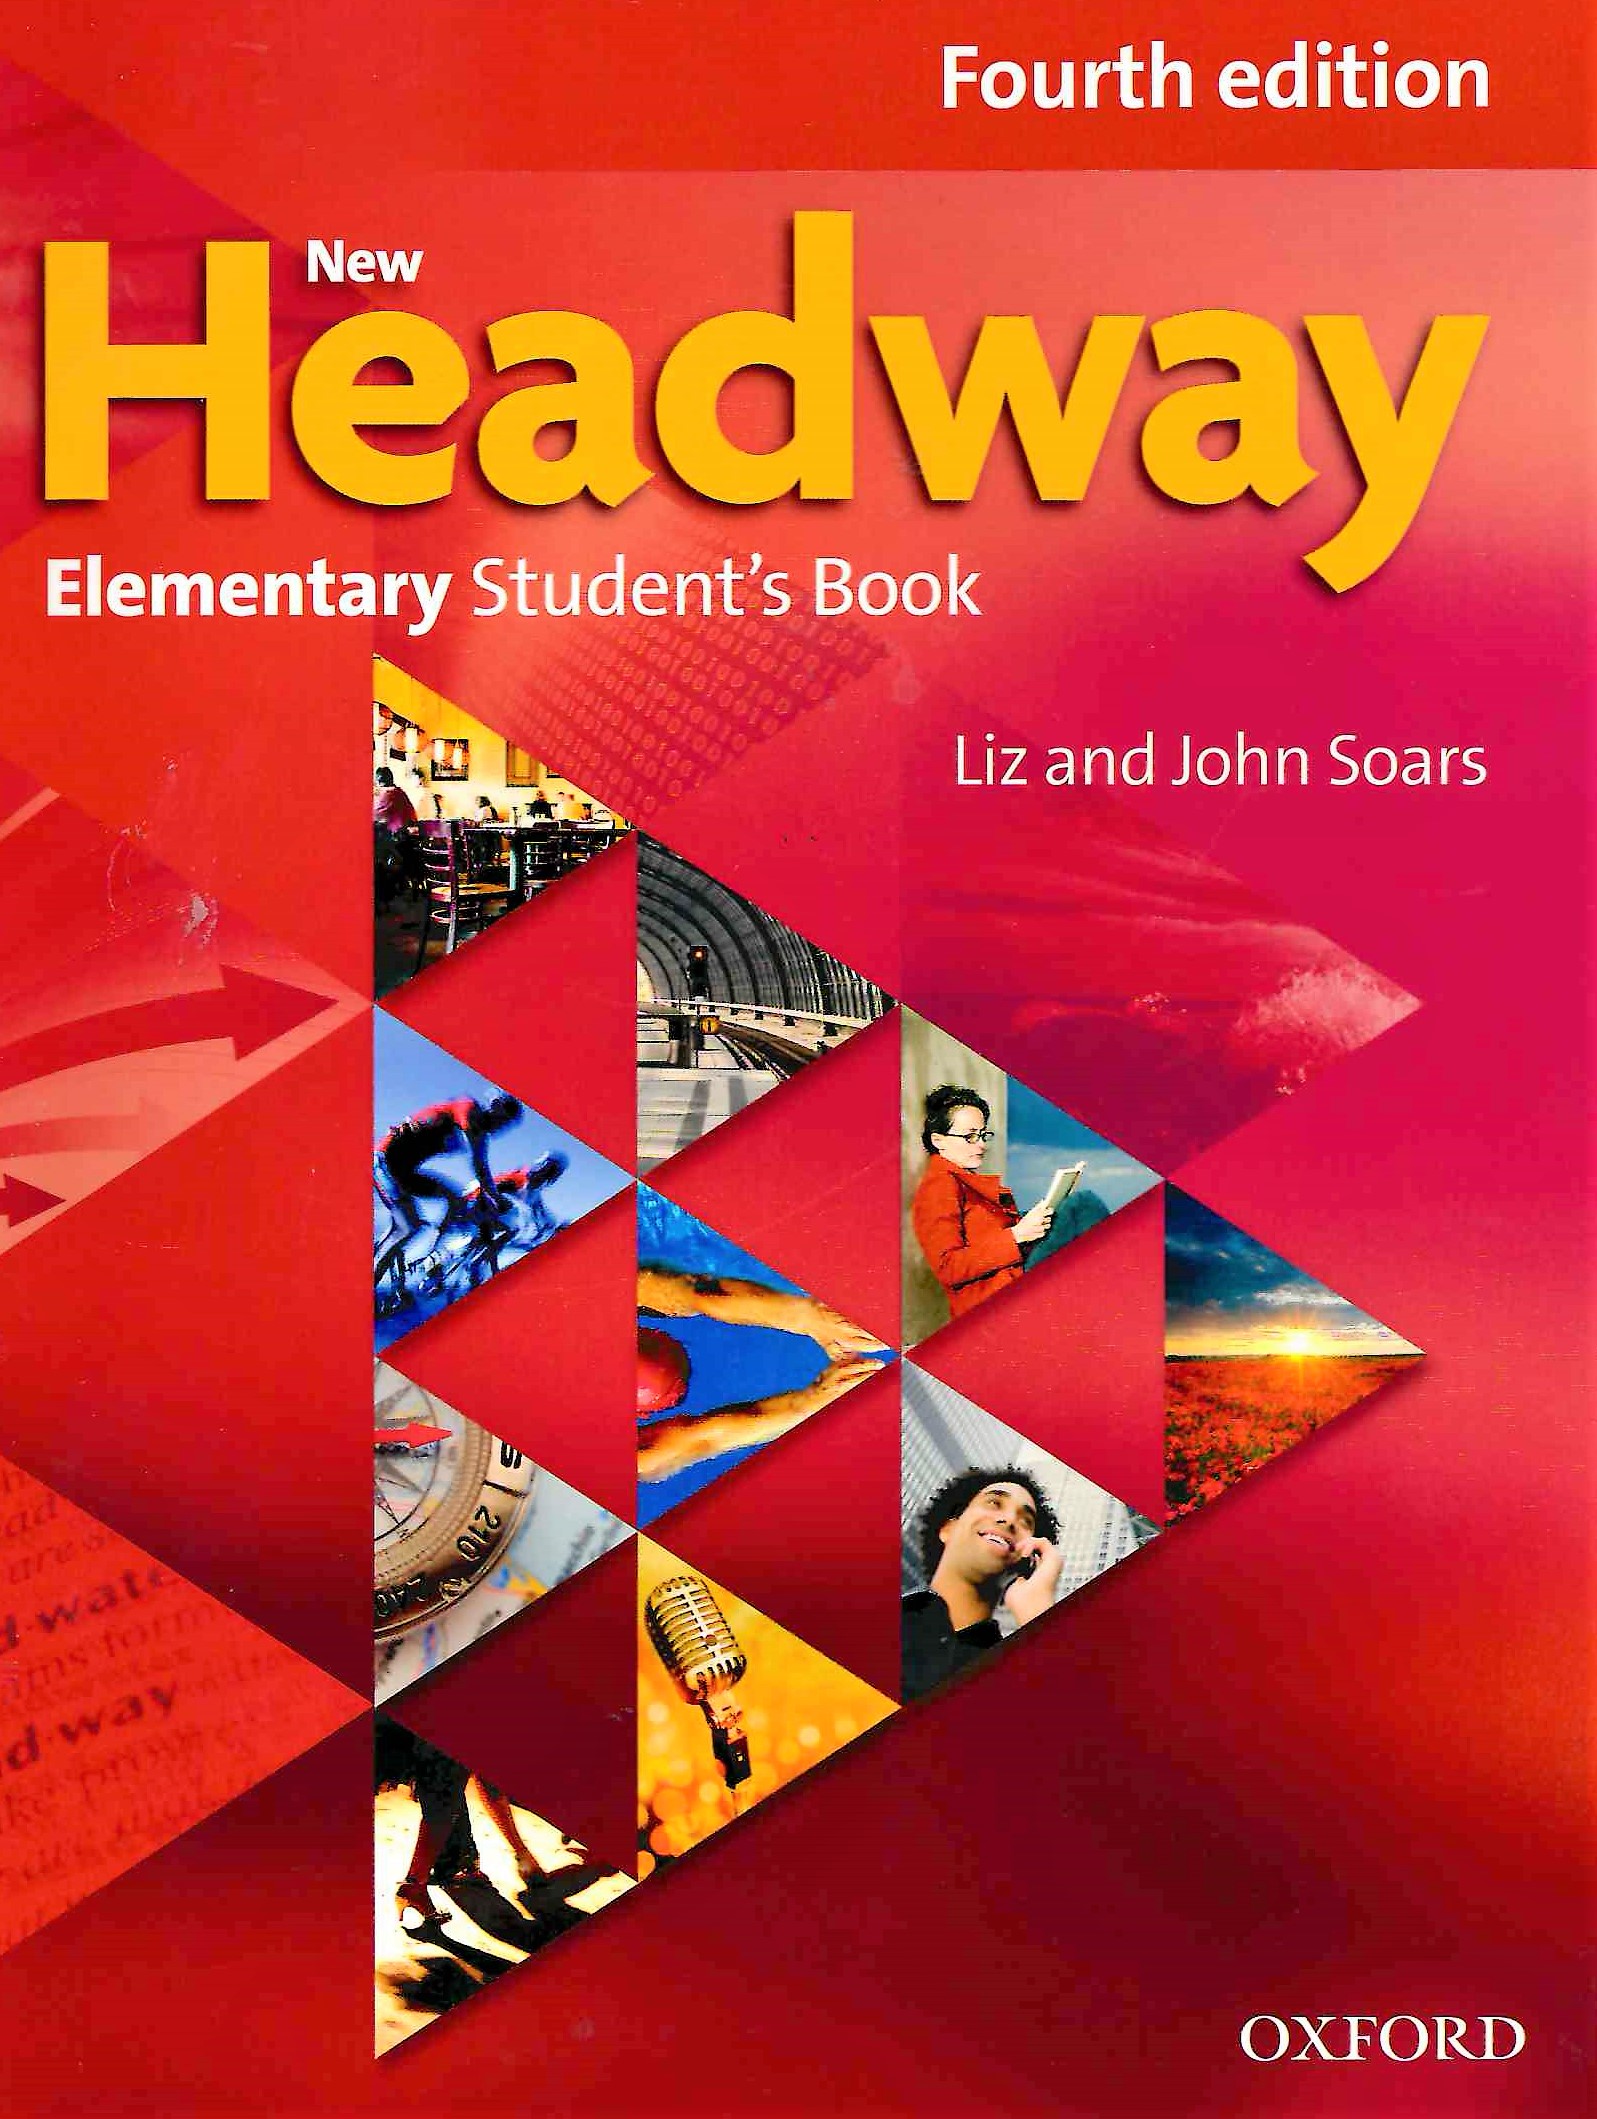 Elementary student s book ответы. New Headway Elementary 3rd Edition. New Headway Beginner 4th Edition. New Headway Elementary Audio 4th Edition. Headway Elementary 4th Edition.